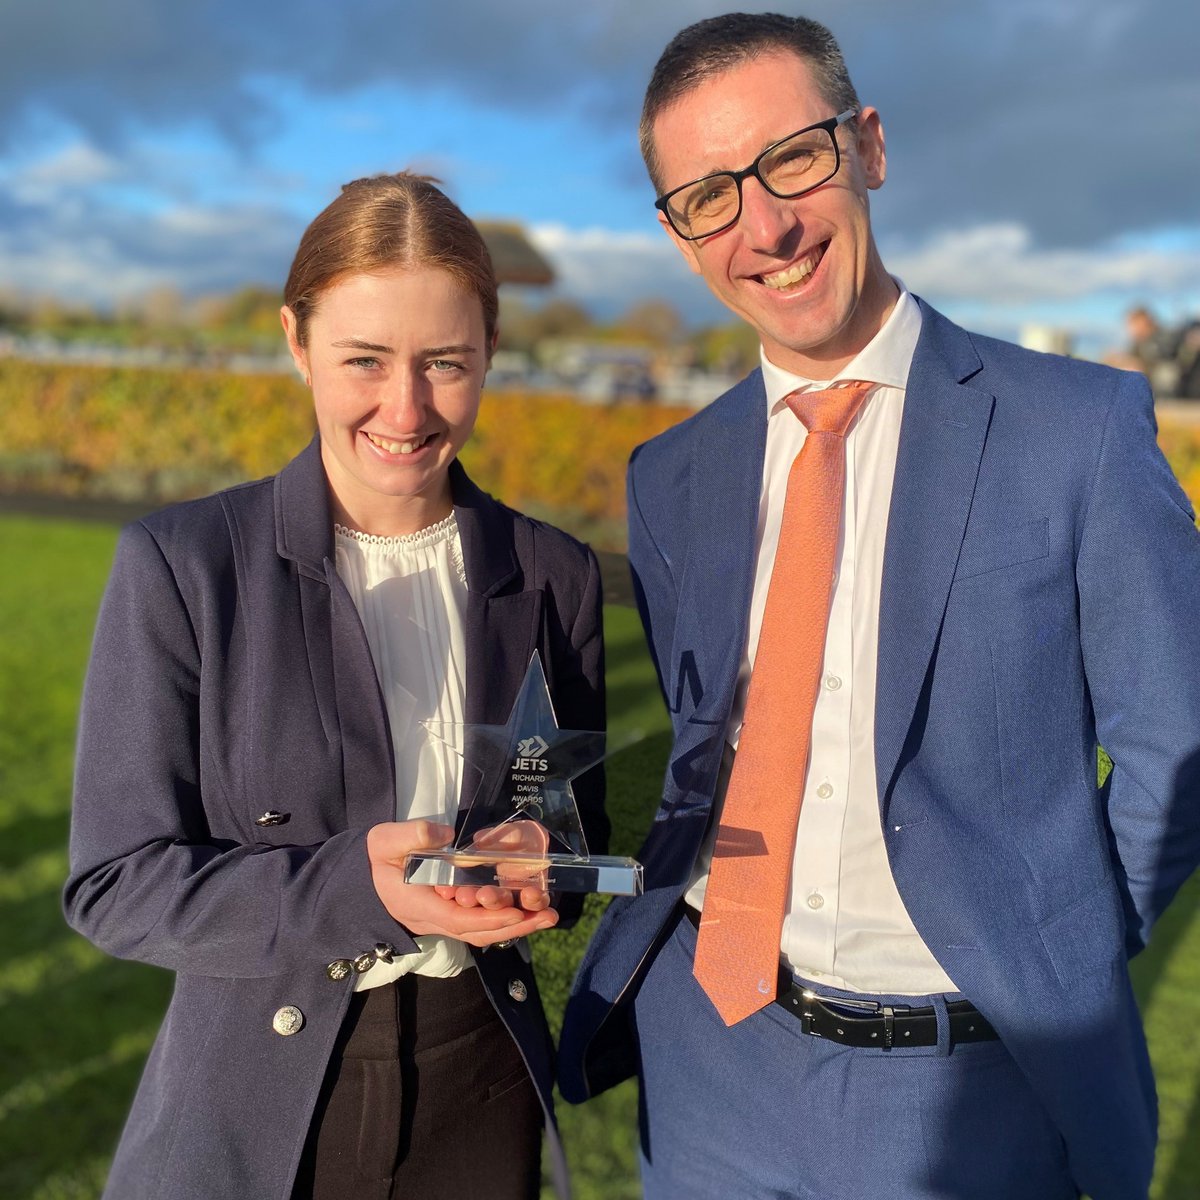 Jockey Olivia Tubb won yesterday's @BHAHorseracing @jockeytraining Development Award and accepted her trophy from @GeorgeENB1982 She has applied herself really positively to her career showing great improvement in so many areas 📽️ICYMI watch film here: youtu.be/lhxl-8Geo_s?si…